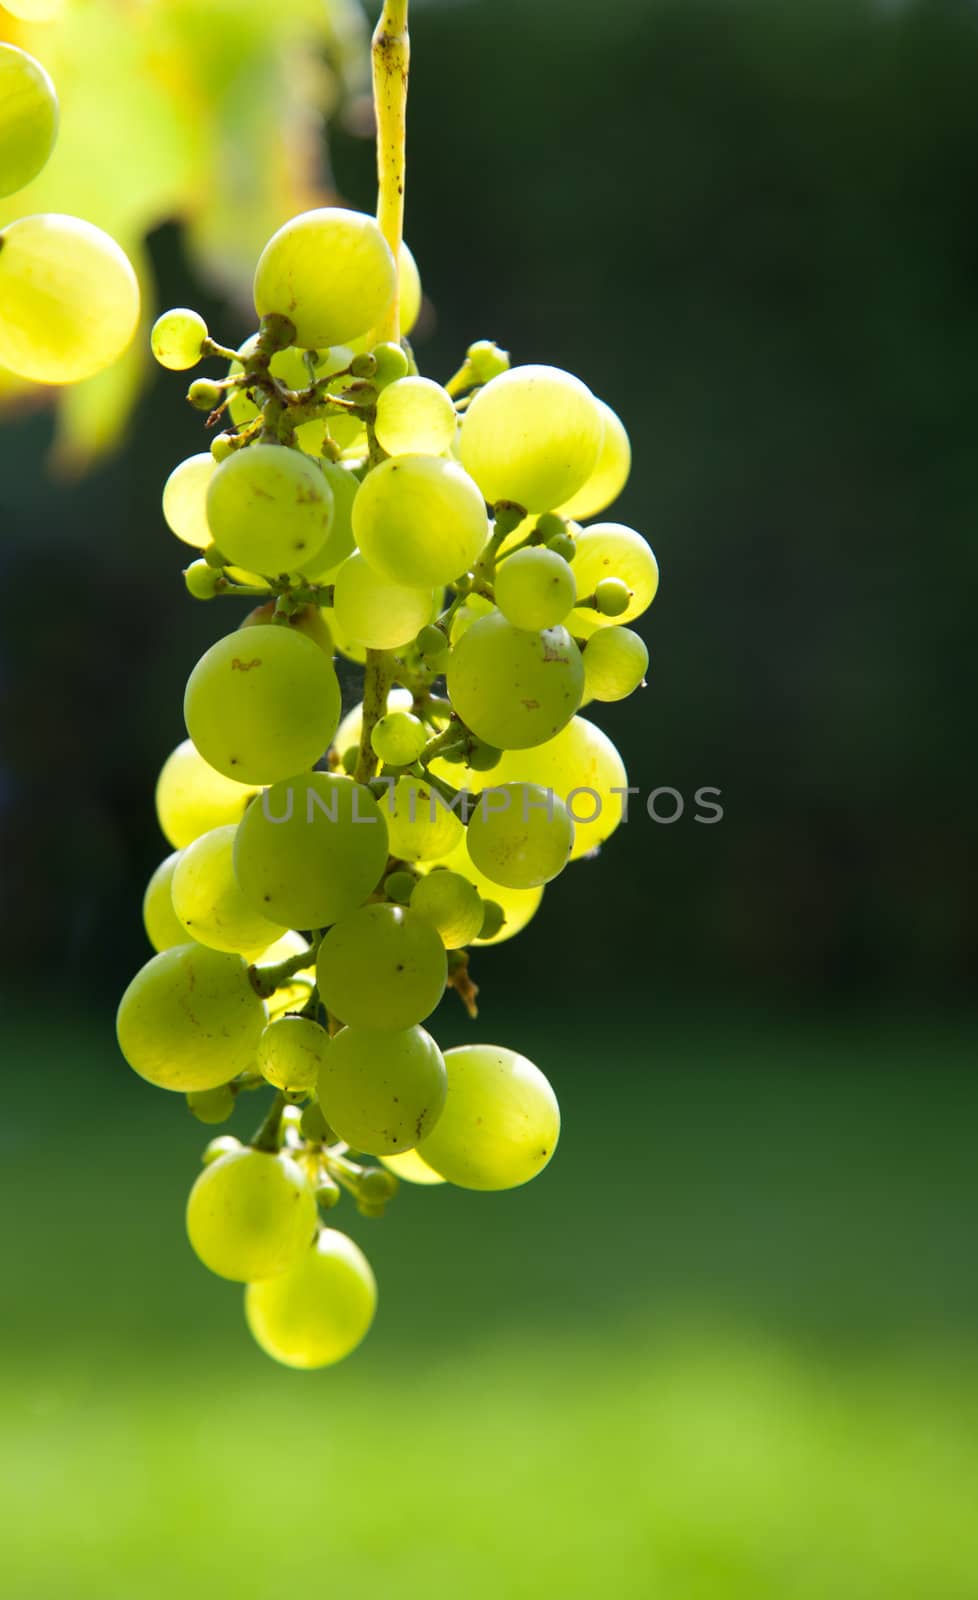 A cluster of green grapes backlit by the sun hanging on a vine with blurred green background.